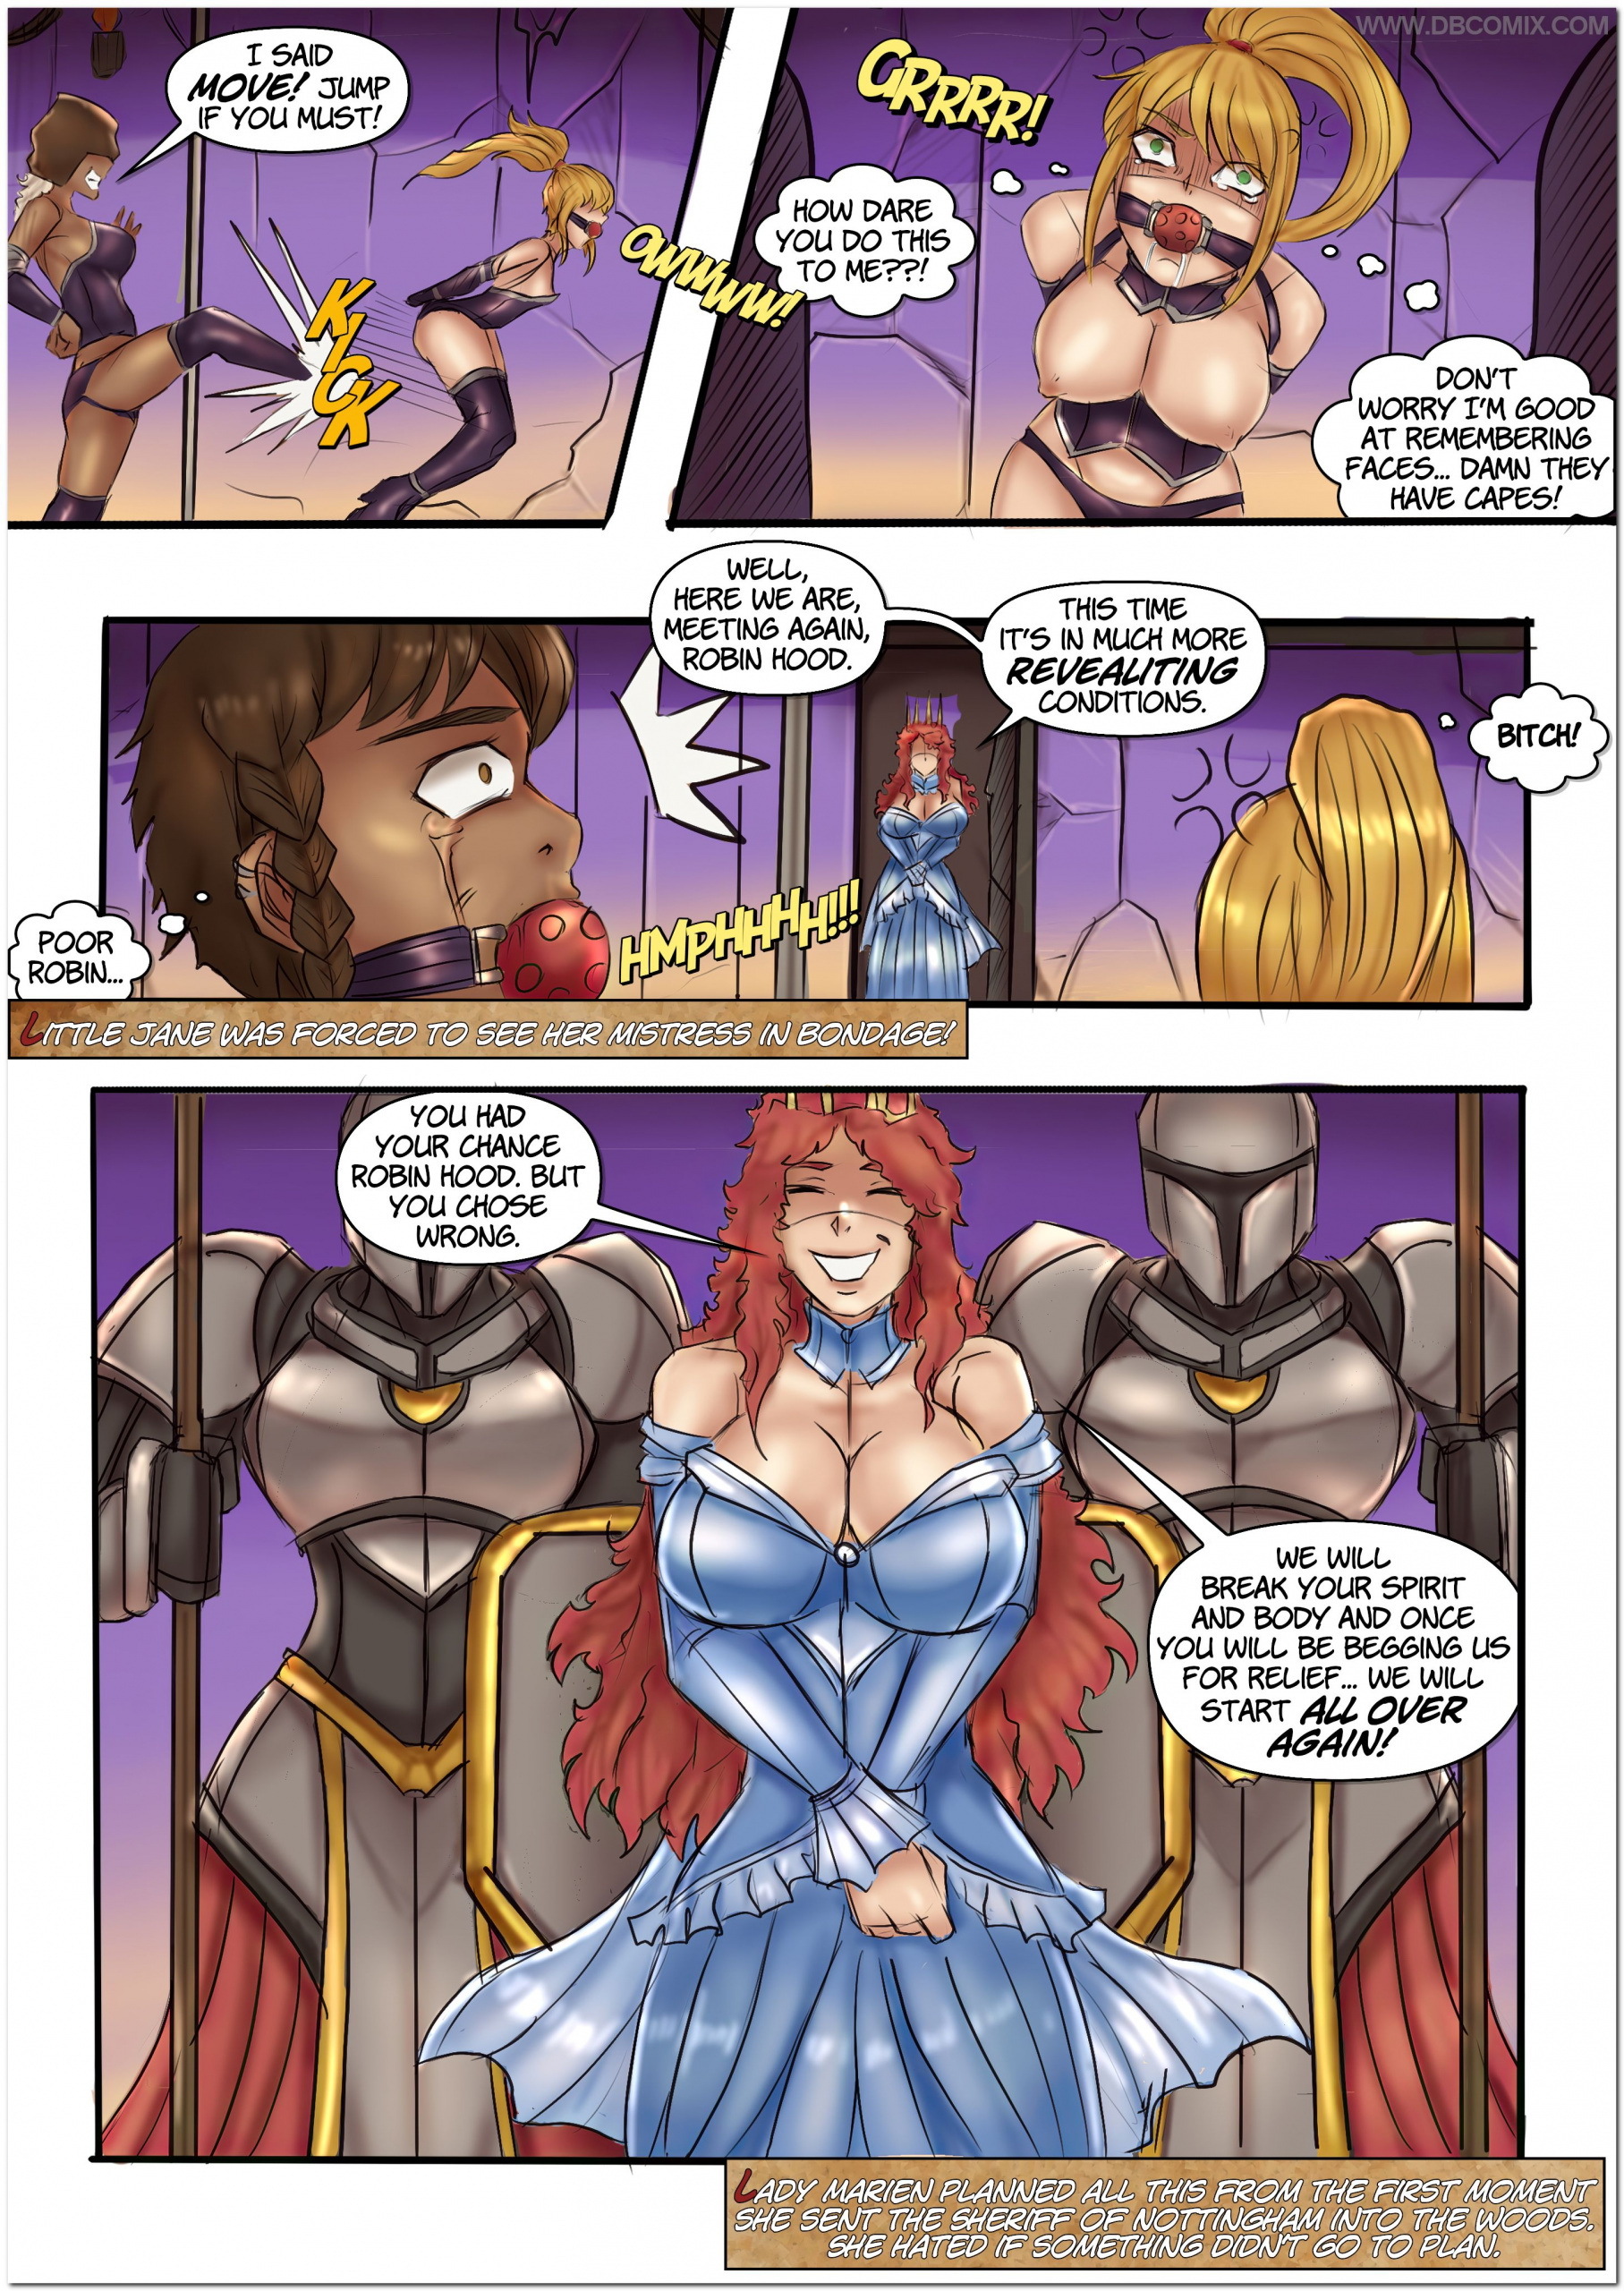 Robin Hood the Queen of Thieves 3 - Page 19